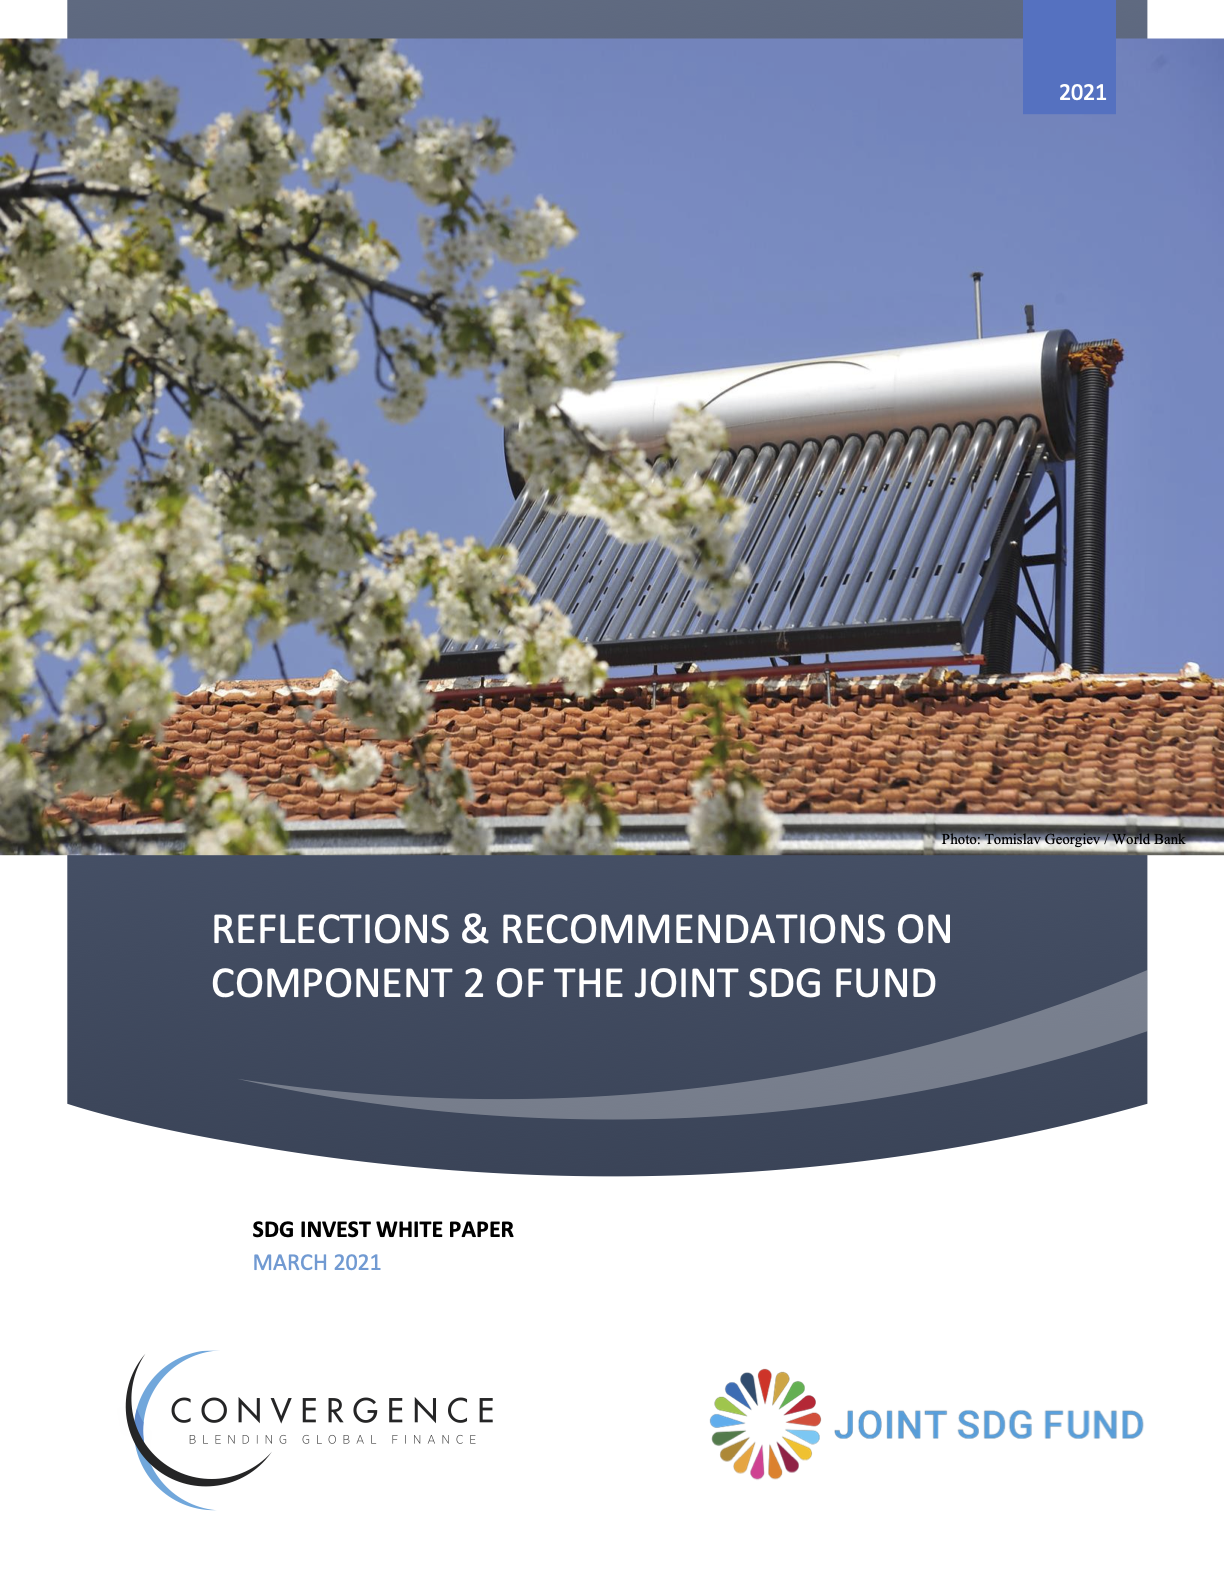 Reflections & Recommendations On Component 2 Of The Joint SDG Fund